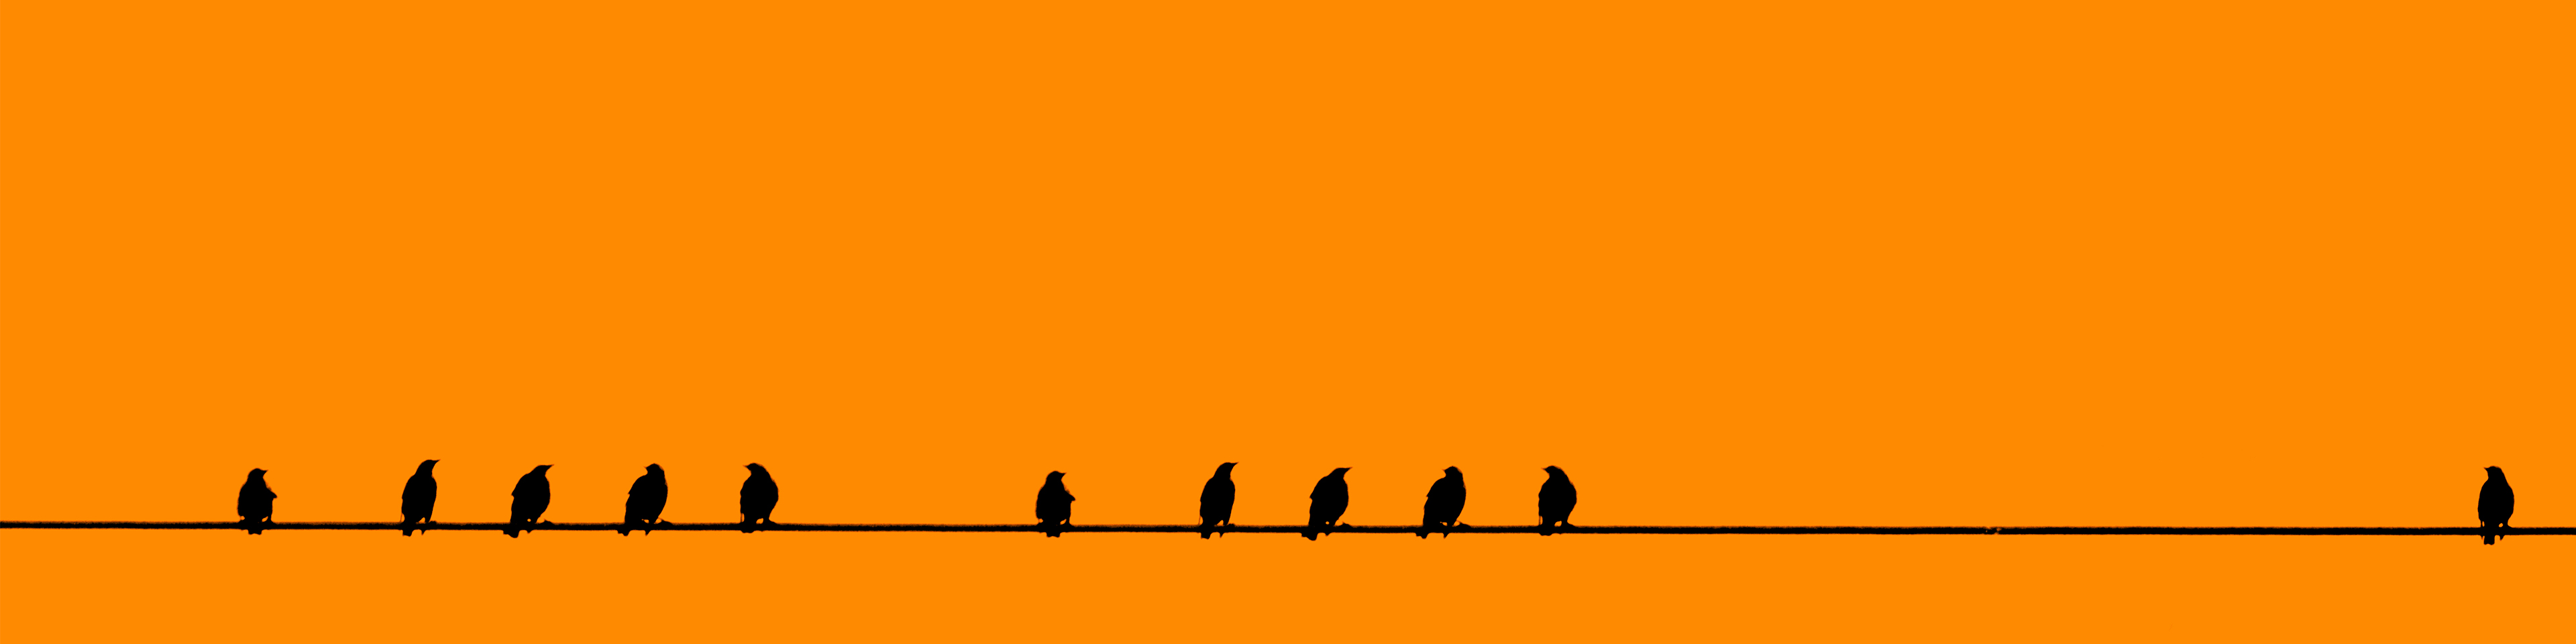 birds-on-a-wire